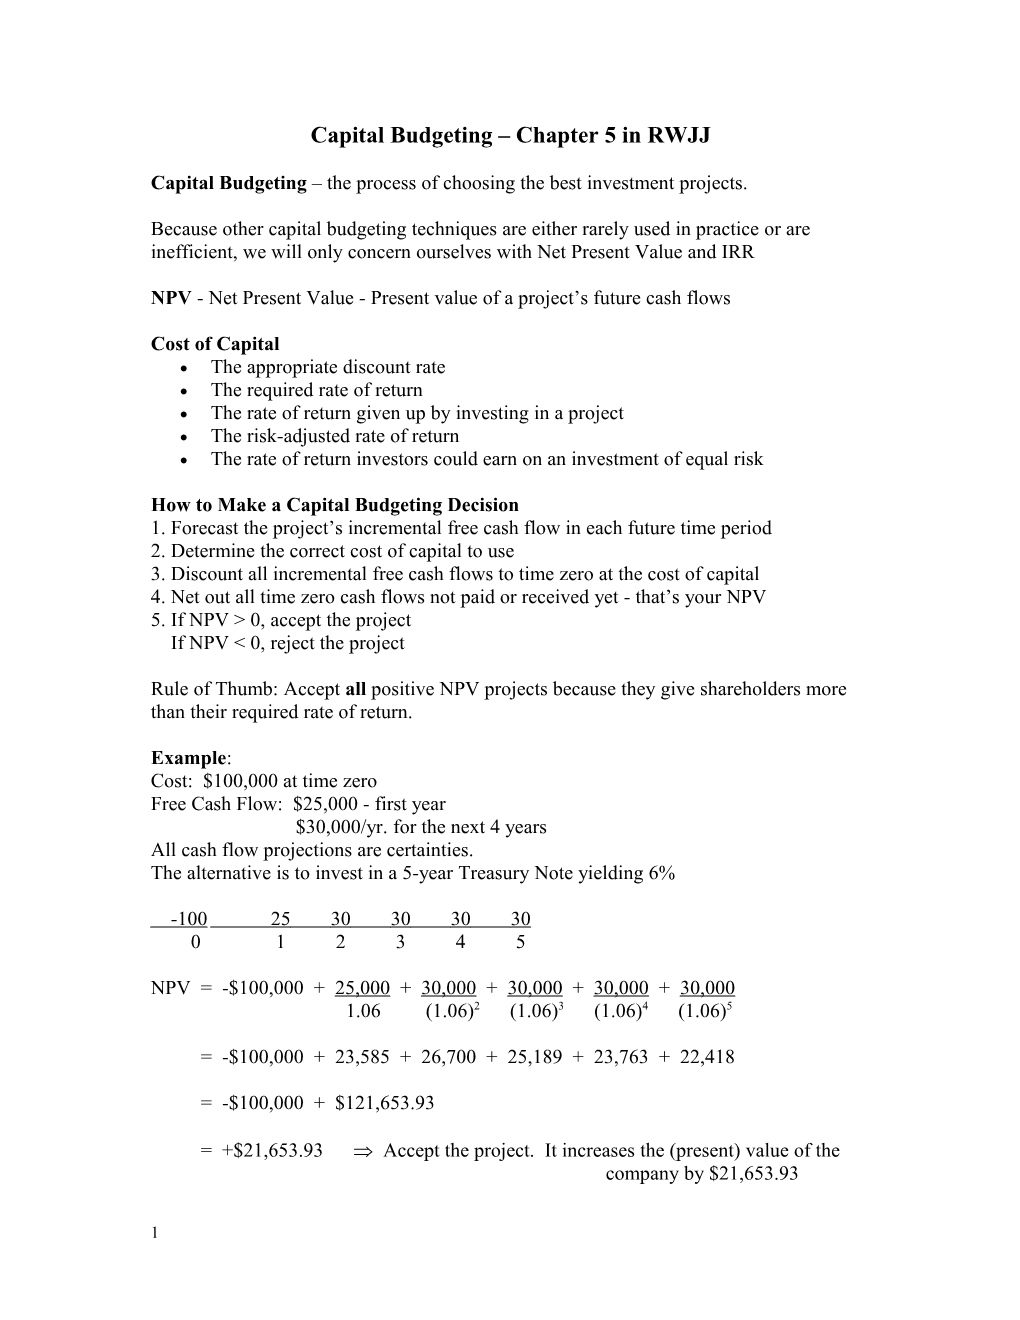 Capital Budgeting Chapter 5 in RWJJ